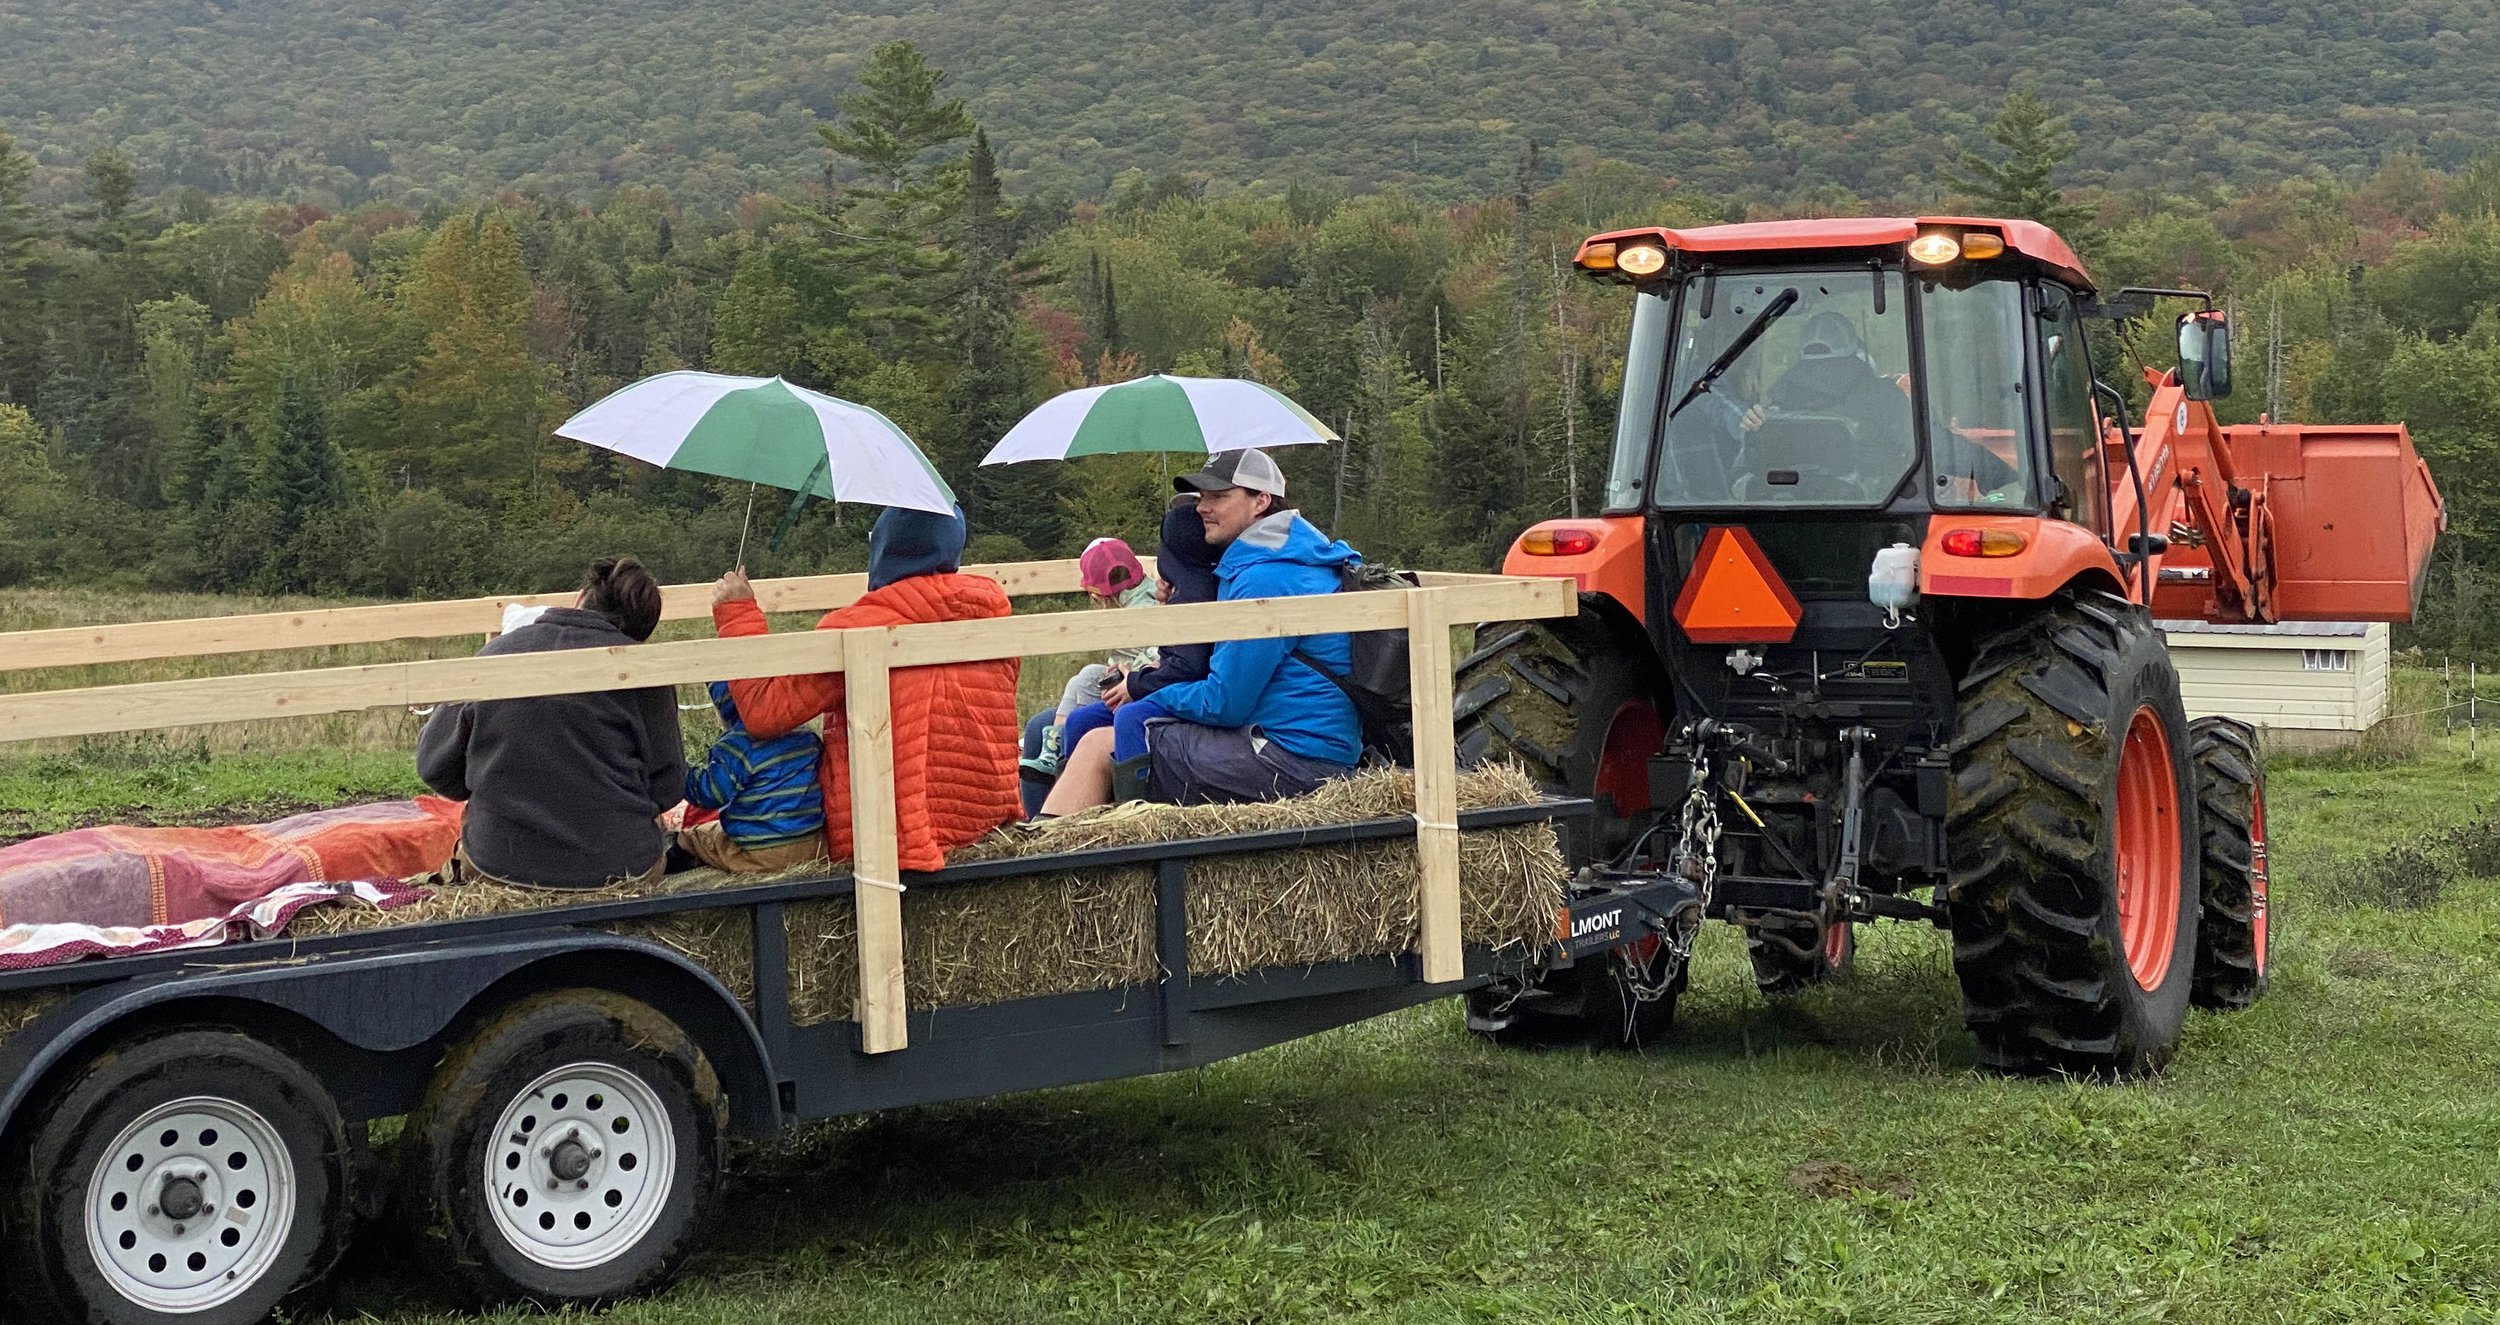  Rich Quevedo, from Elmore but originally from Waterbury, showed up with a tractor and wagons for hayrides that didn’t stop for three hours. Photo by Gordon Miller 